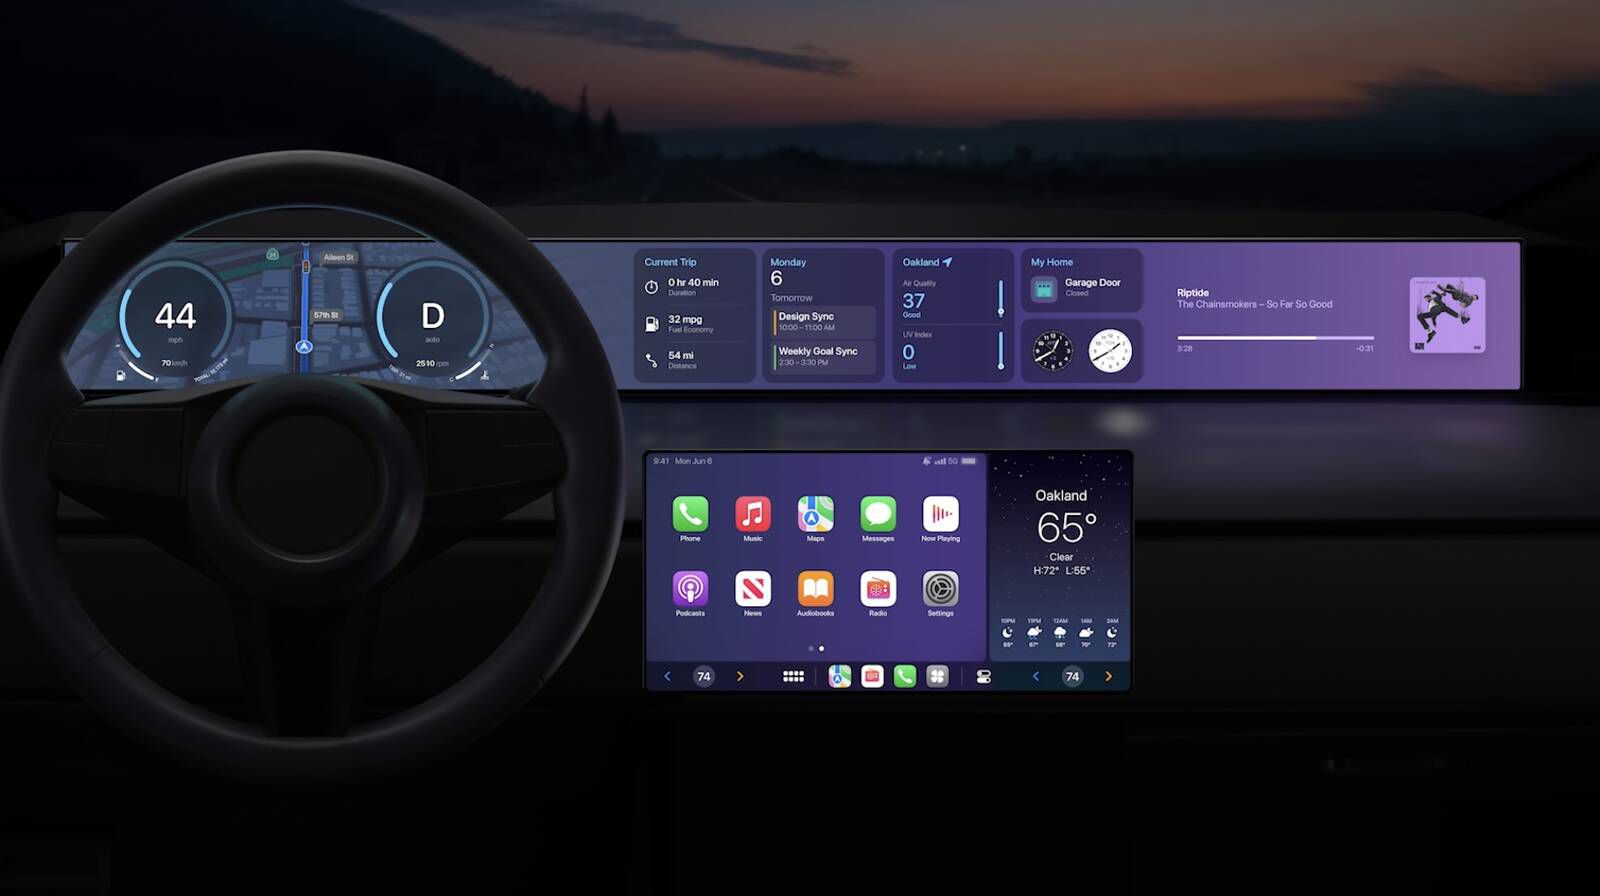 Apple Announces Multi-Display CarPlay With Integrated Speedometer, Climate Controls, and More - macrumors.com